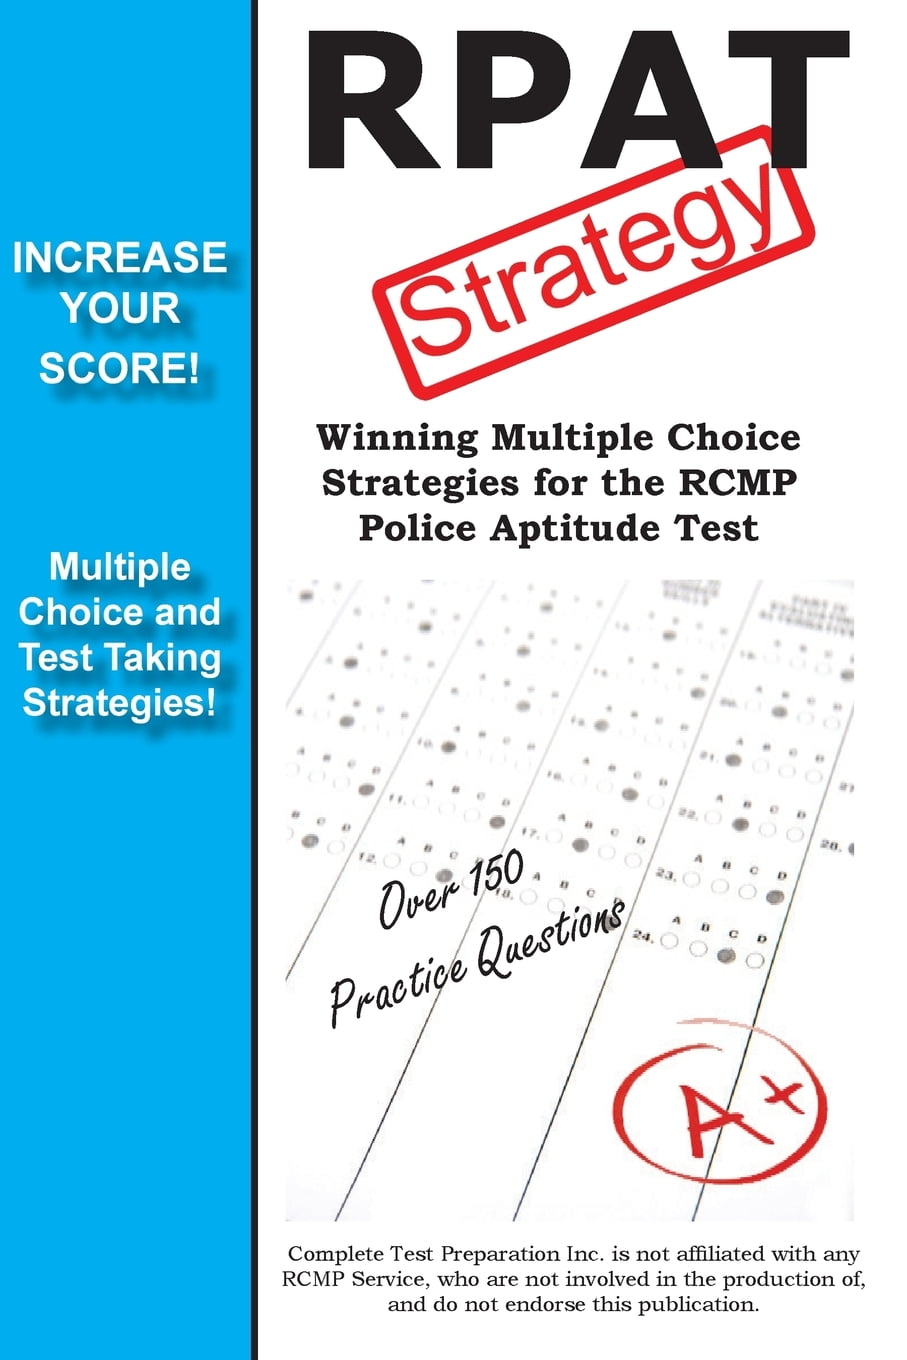 rpat-test-strategy-for-the-rcmp-police-aptitude-test-paperback-walmart